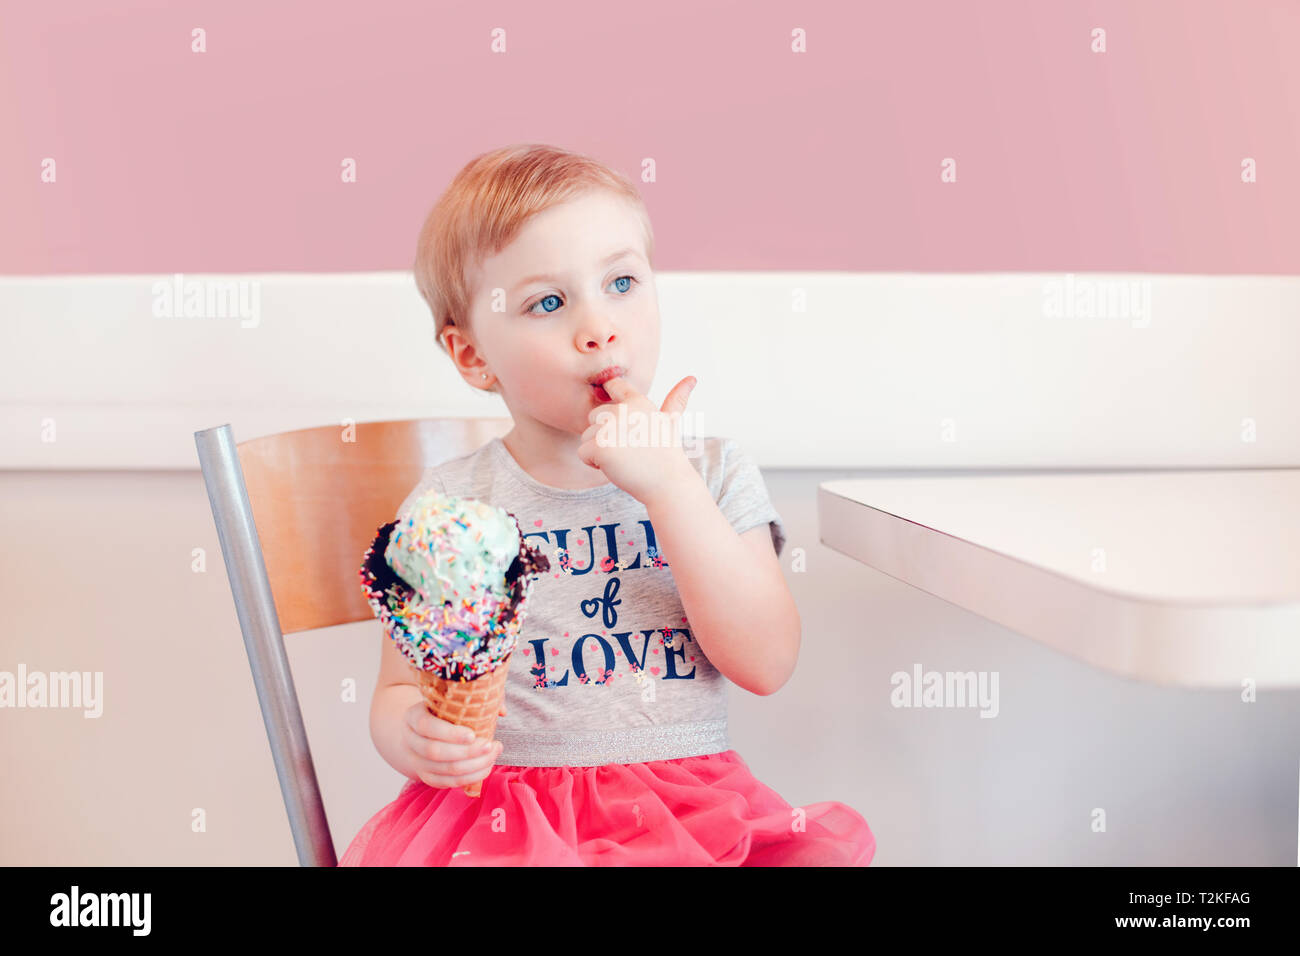 Cute adorable funny Caucasian blonde babyl girl child with blue eyes eating ice cream in large waffle cone with colorful sprinkles. Kid licking finger Stock Photo